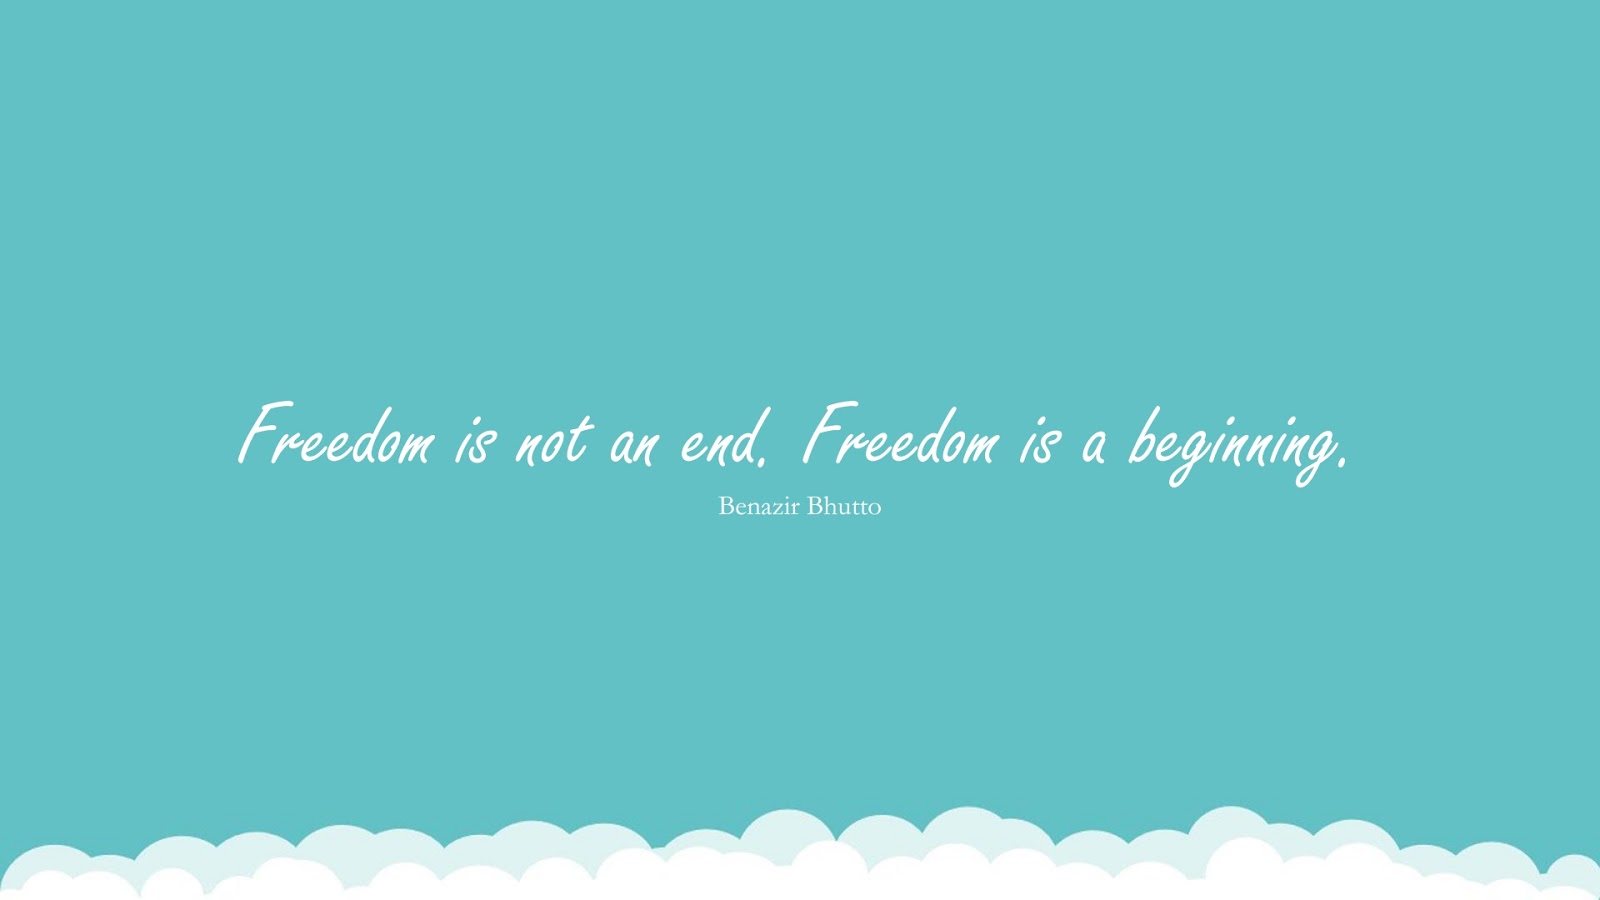 Freedom is not an end. Freedom is a beginning. (Benazir Bhutto);  #HumanityQuotes